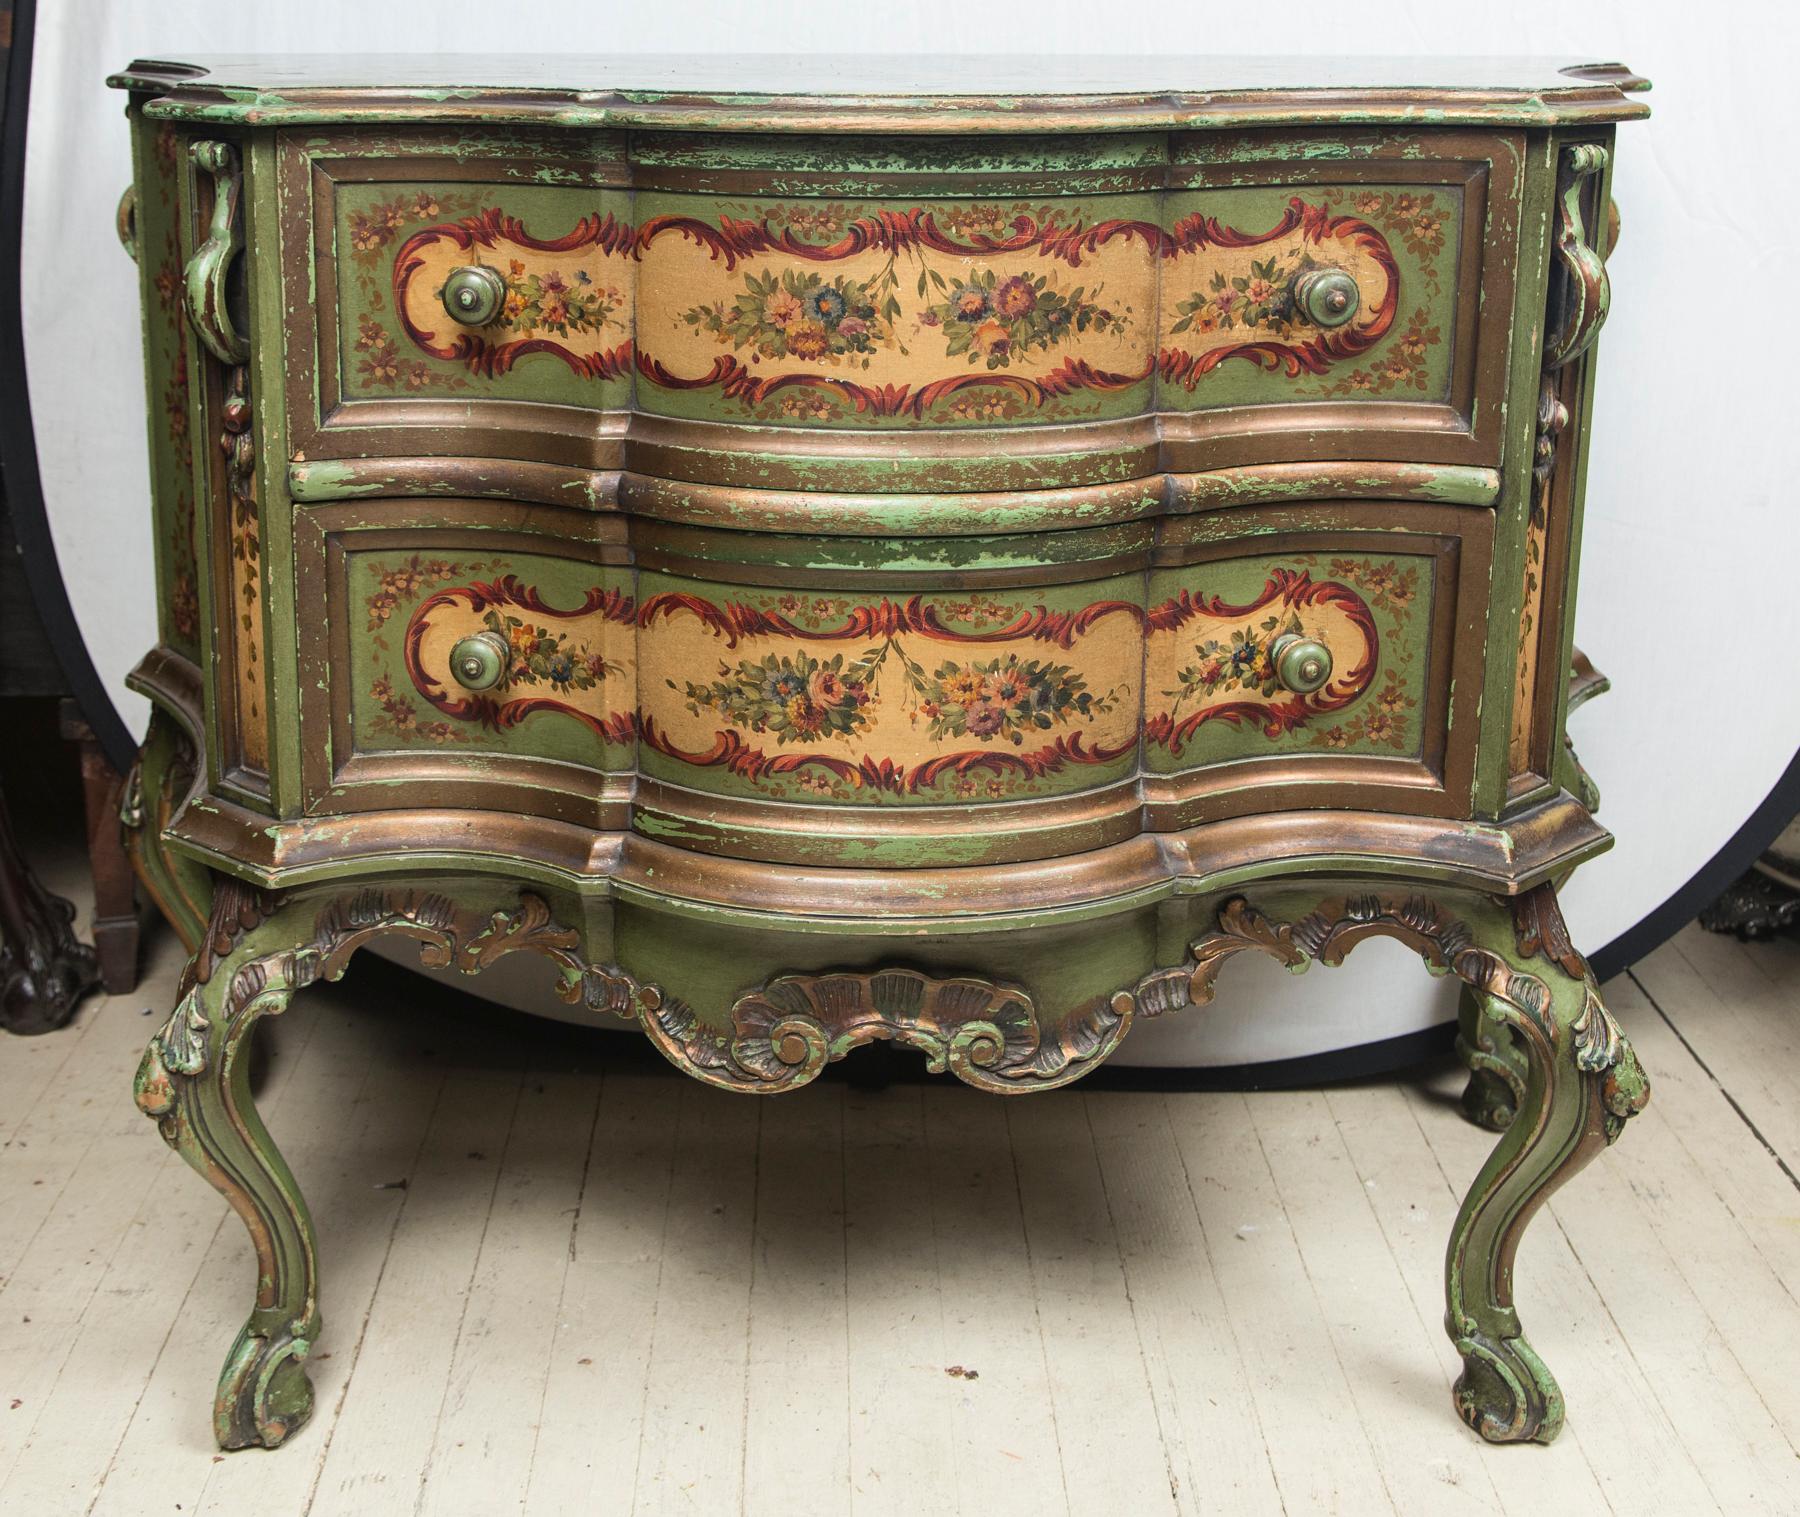 The serpentine commode with 2 drawers. The top painted faux marble. The drawers and sides painted with florals set within garland cartouches. Cabriole legs adorned with carved leaves and paint decoration. Carved ornamentation at the top of each